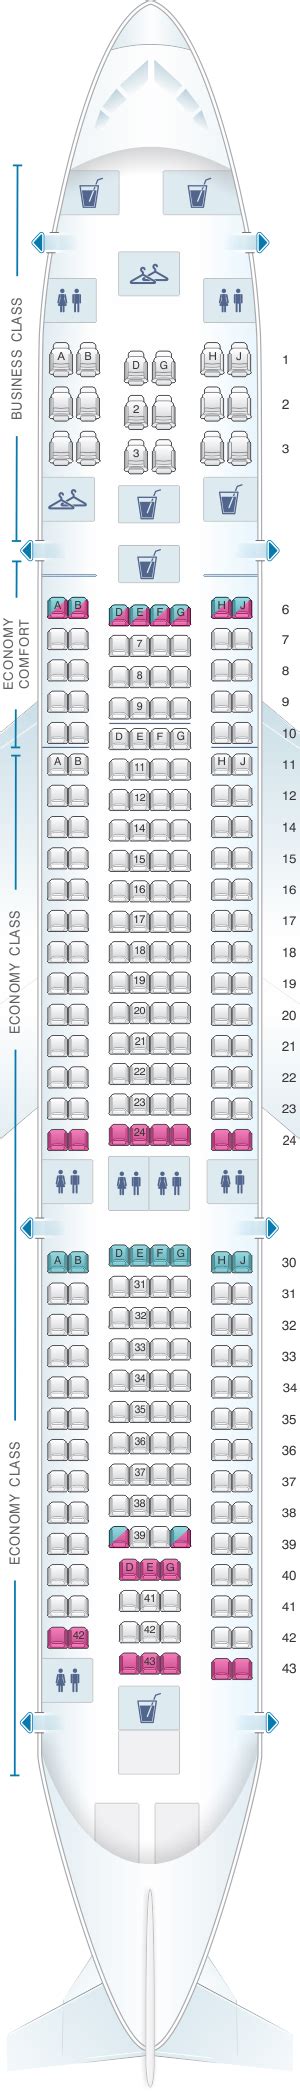 A330 300 Klm Seat Map